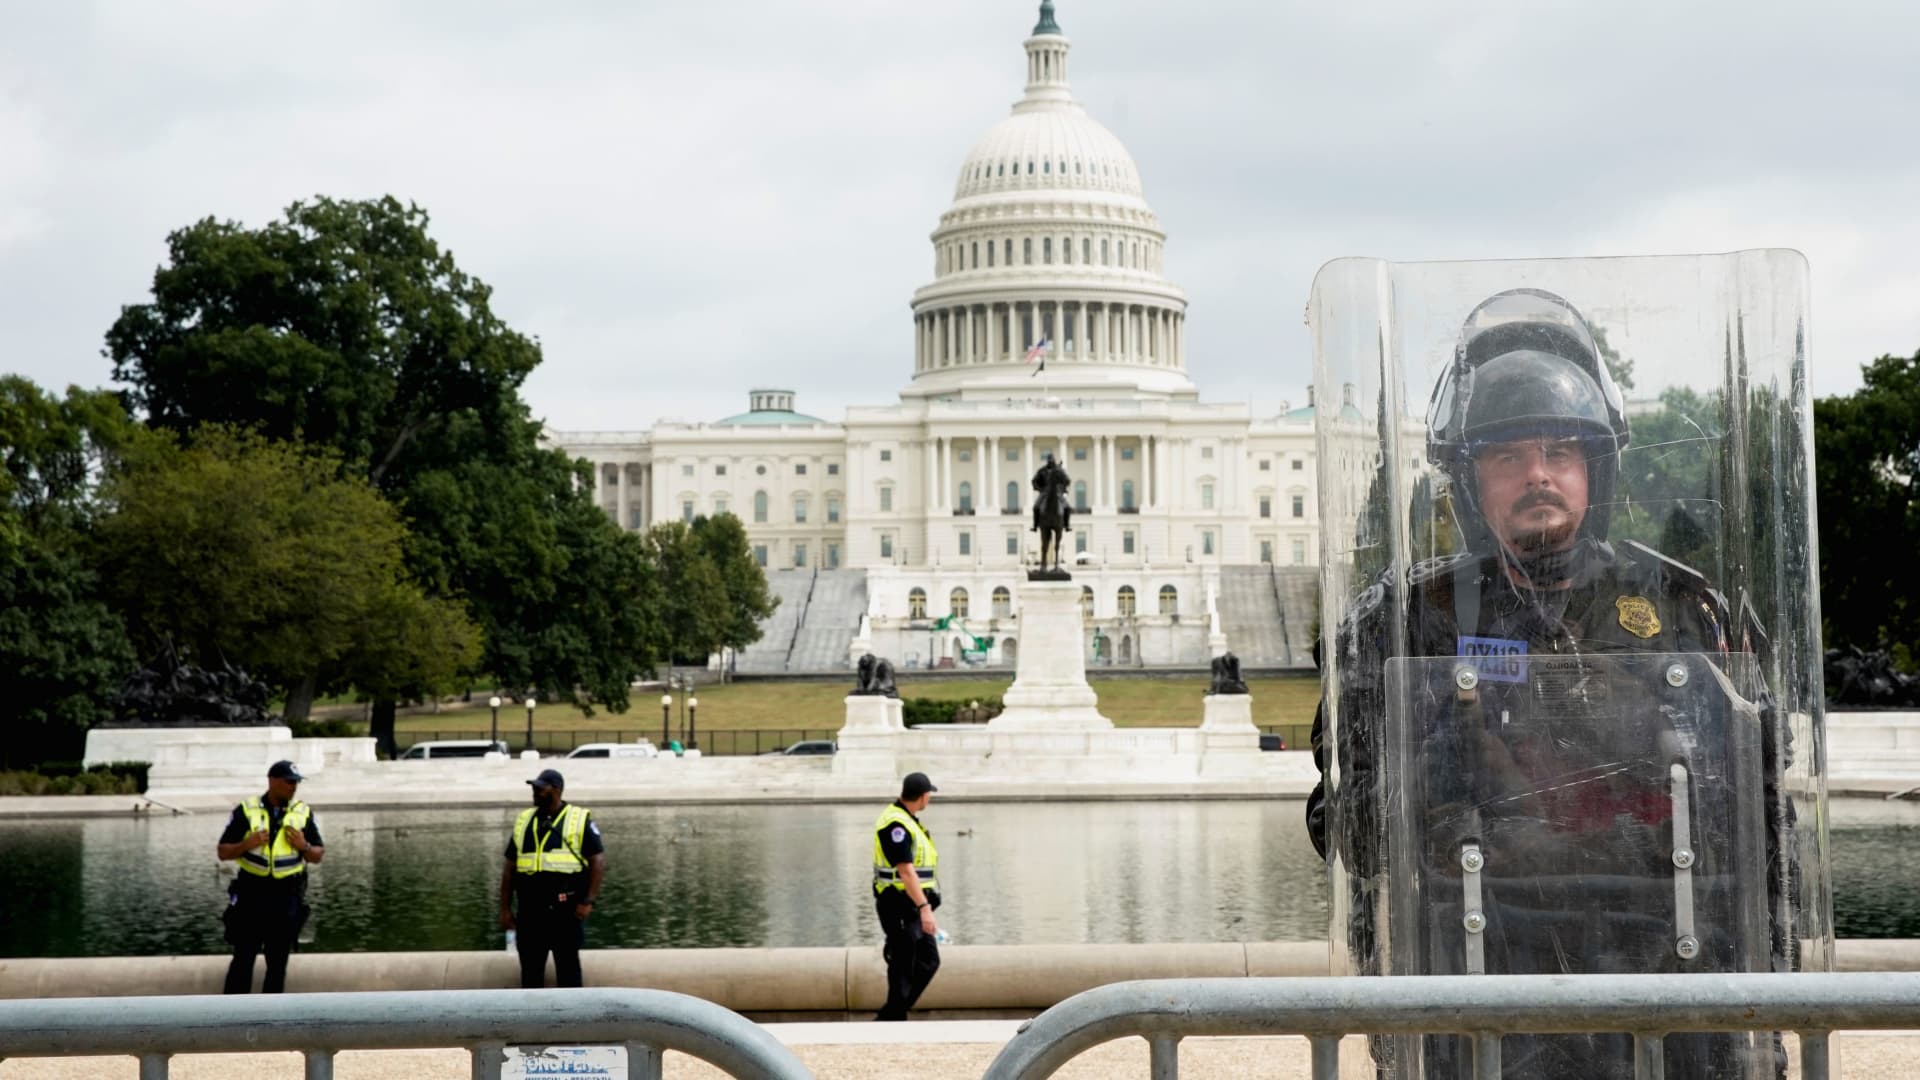 A riot police officer stands guard during a rally in support of defendants being prosecuted in the January 6 attack on the Capitol, in Washington, U.S., September 18, 2021.